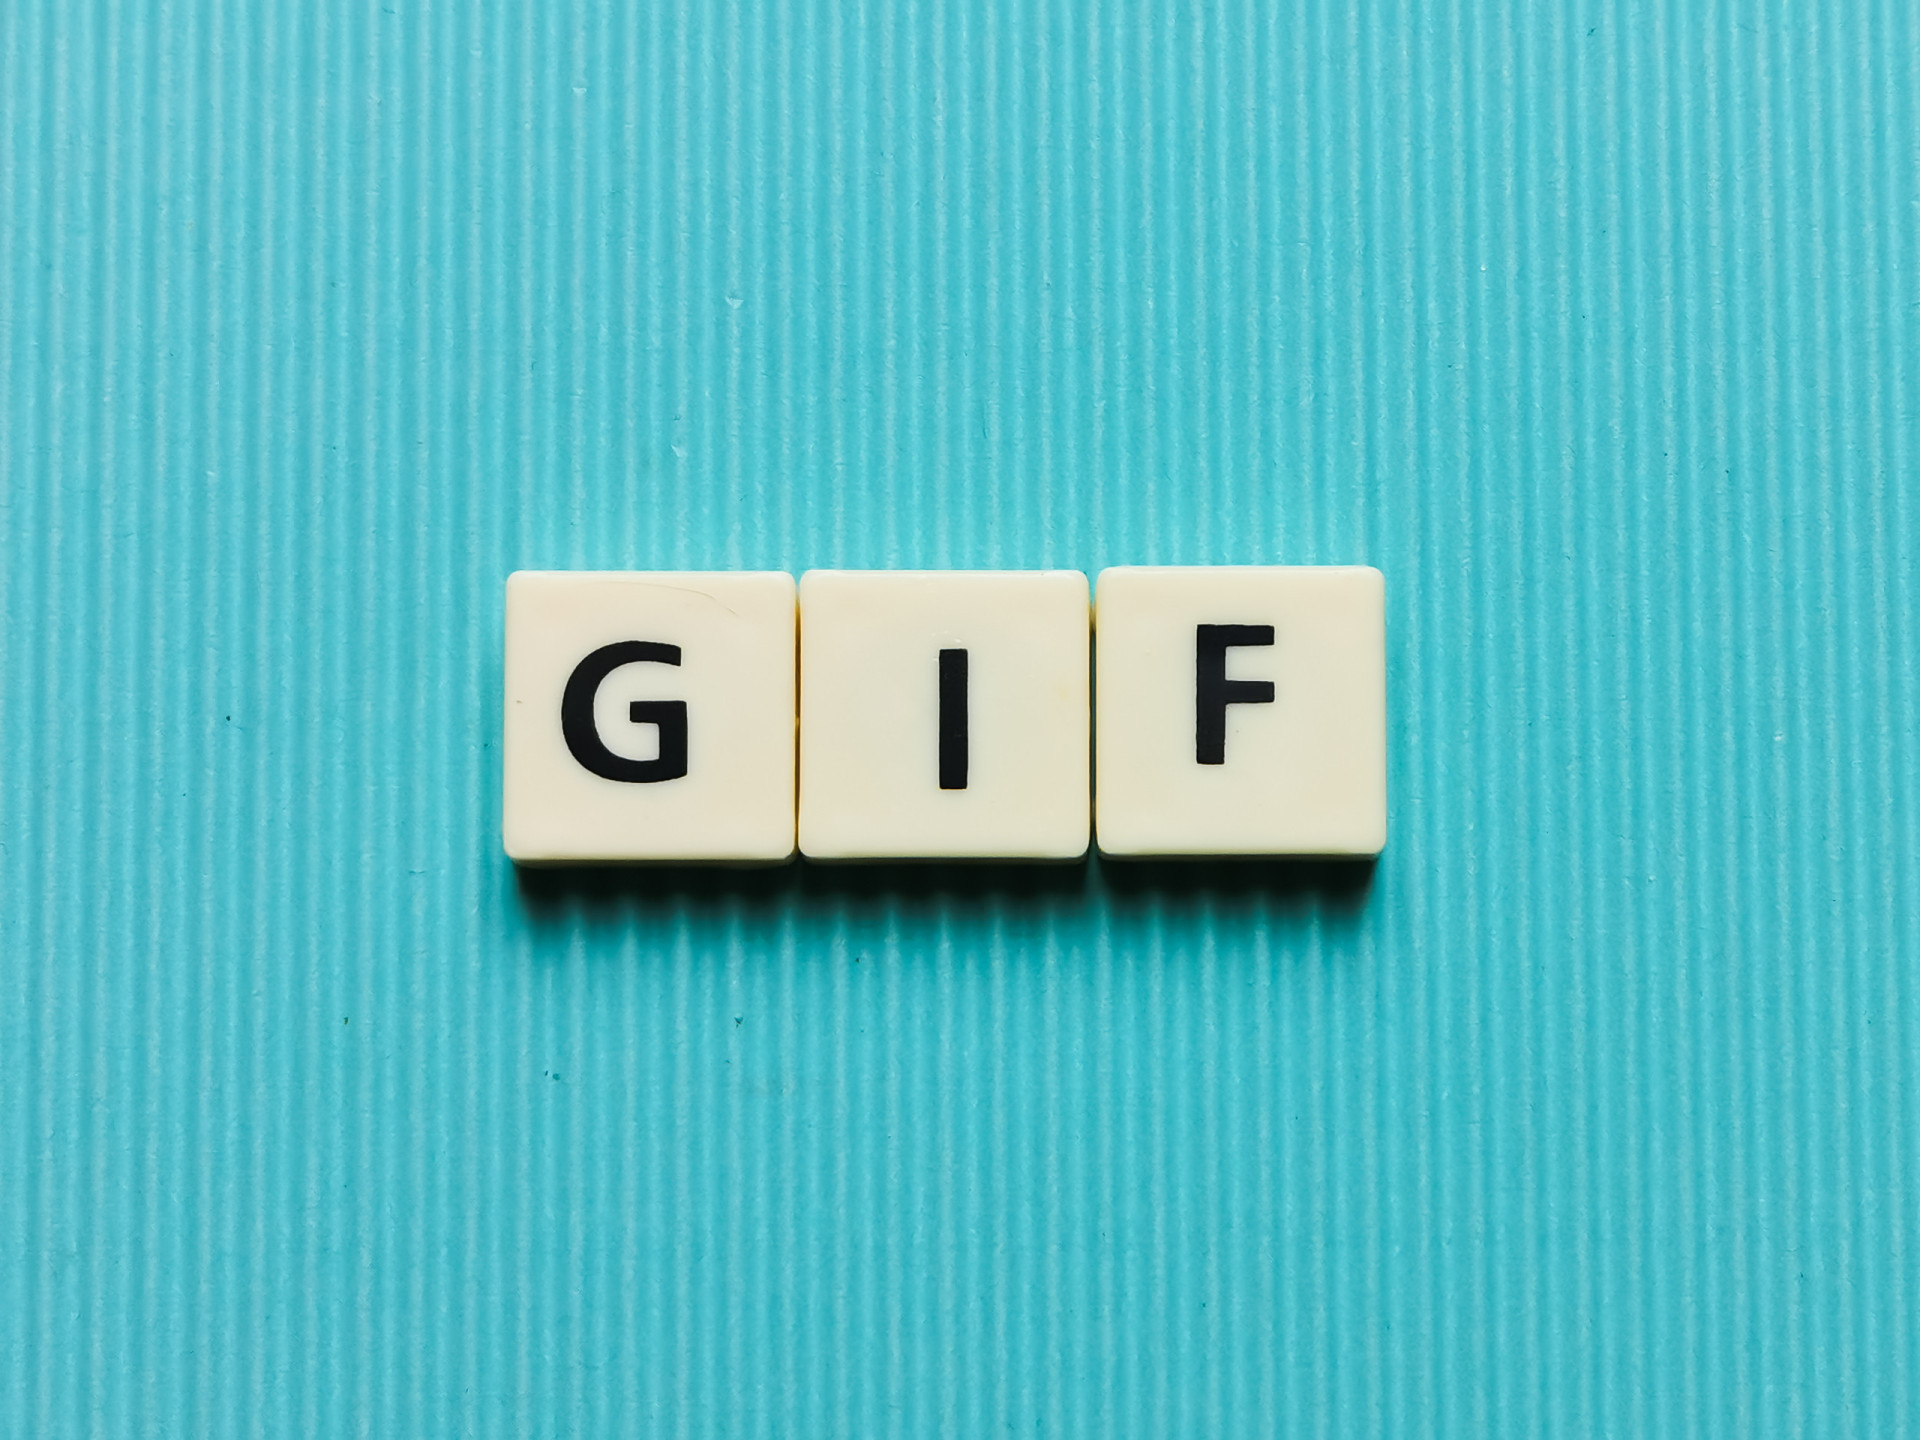 <p>When people search for these moving images, many don't know that GIF stands for "graphics interchange format."</p><p>You may also like:<a href="https://www.starsinsider.com/n/426588?utm_source=msn.com&utm_medium=display&utm_campaign=referral_description&utm_content=537630en-en"> These celebrities can't cook to save their lives</a></p>